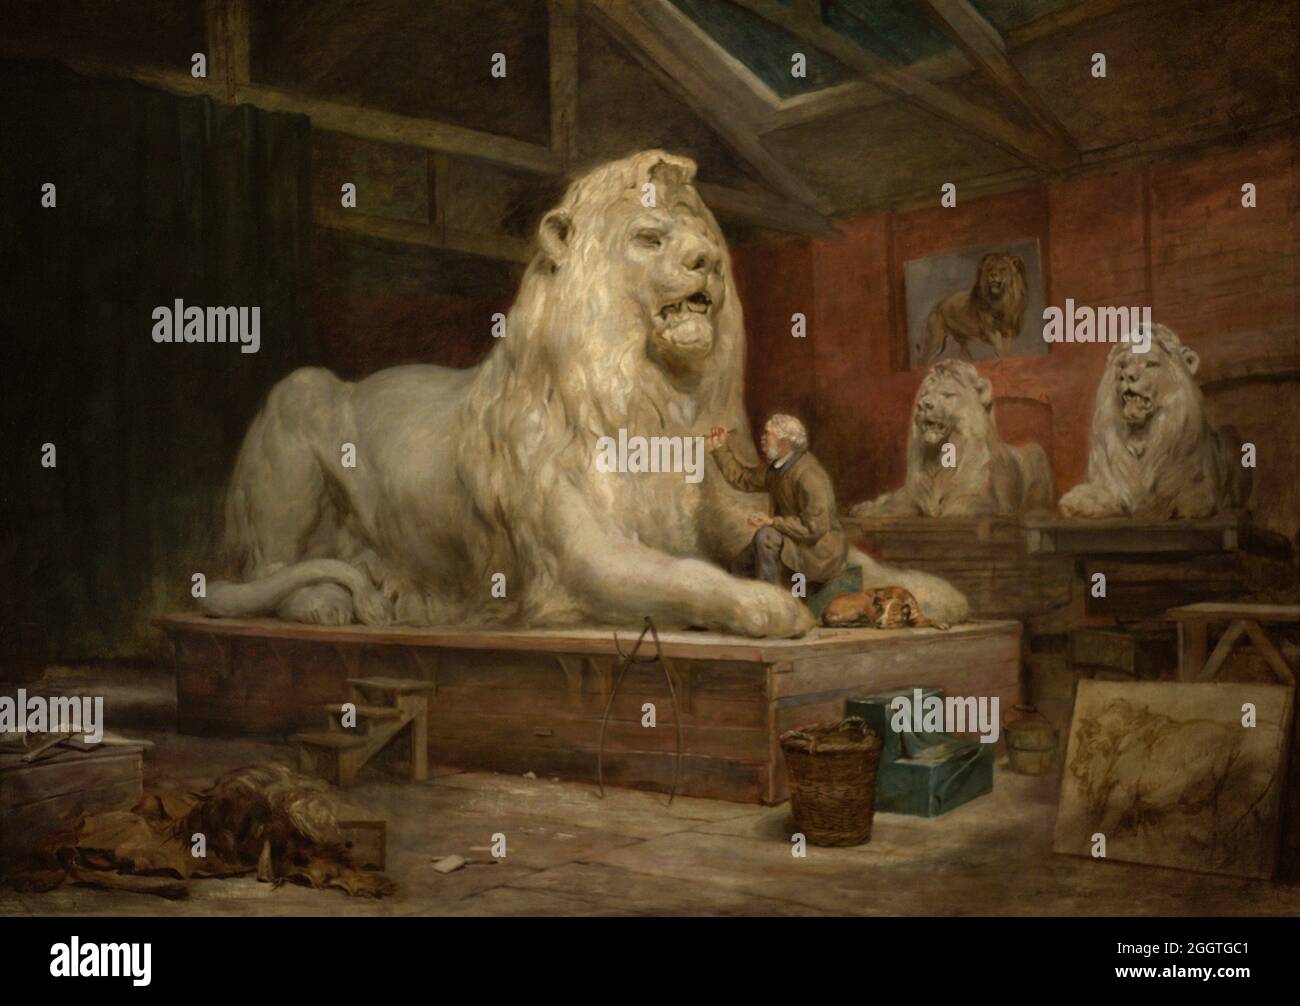 Edwin Landseer (1802-1873). British painter and sculptor. Landseer modelling one of the lions of the Column of Nelson in Trafalgar Square, in the Kensington workshop of the sculptor Carlo Marochetti. Painting by John Ballantyne (1815-1897). Oil on canvas (80 x 113 cm), ca. 1865. National Portrait Gallery. London, England, United Kingdom. Stock Photo